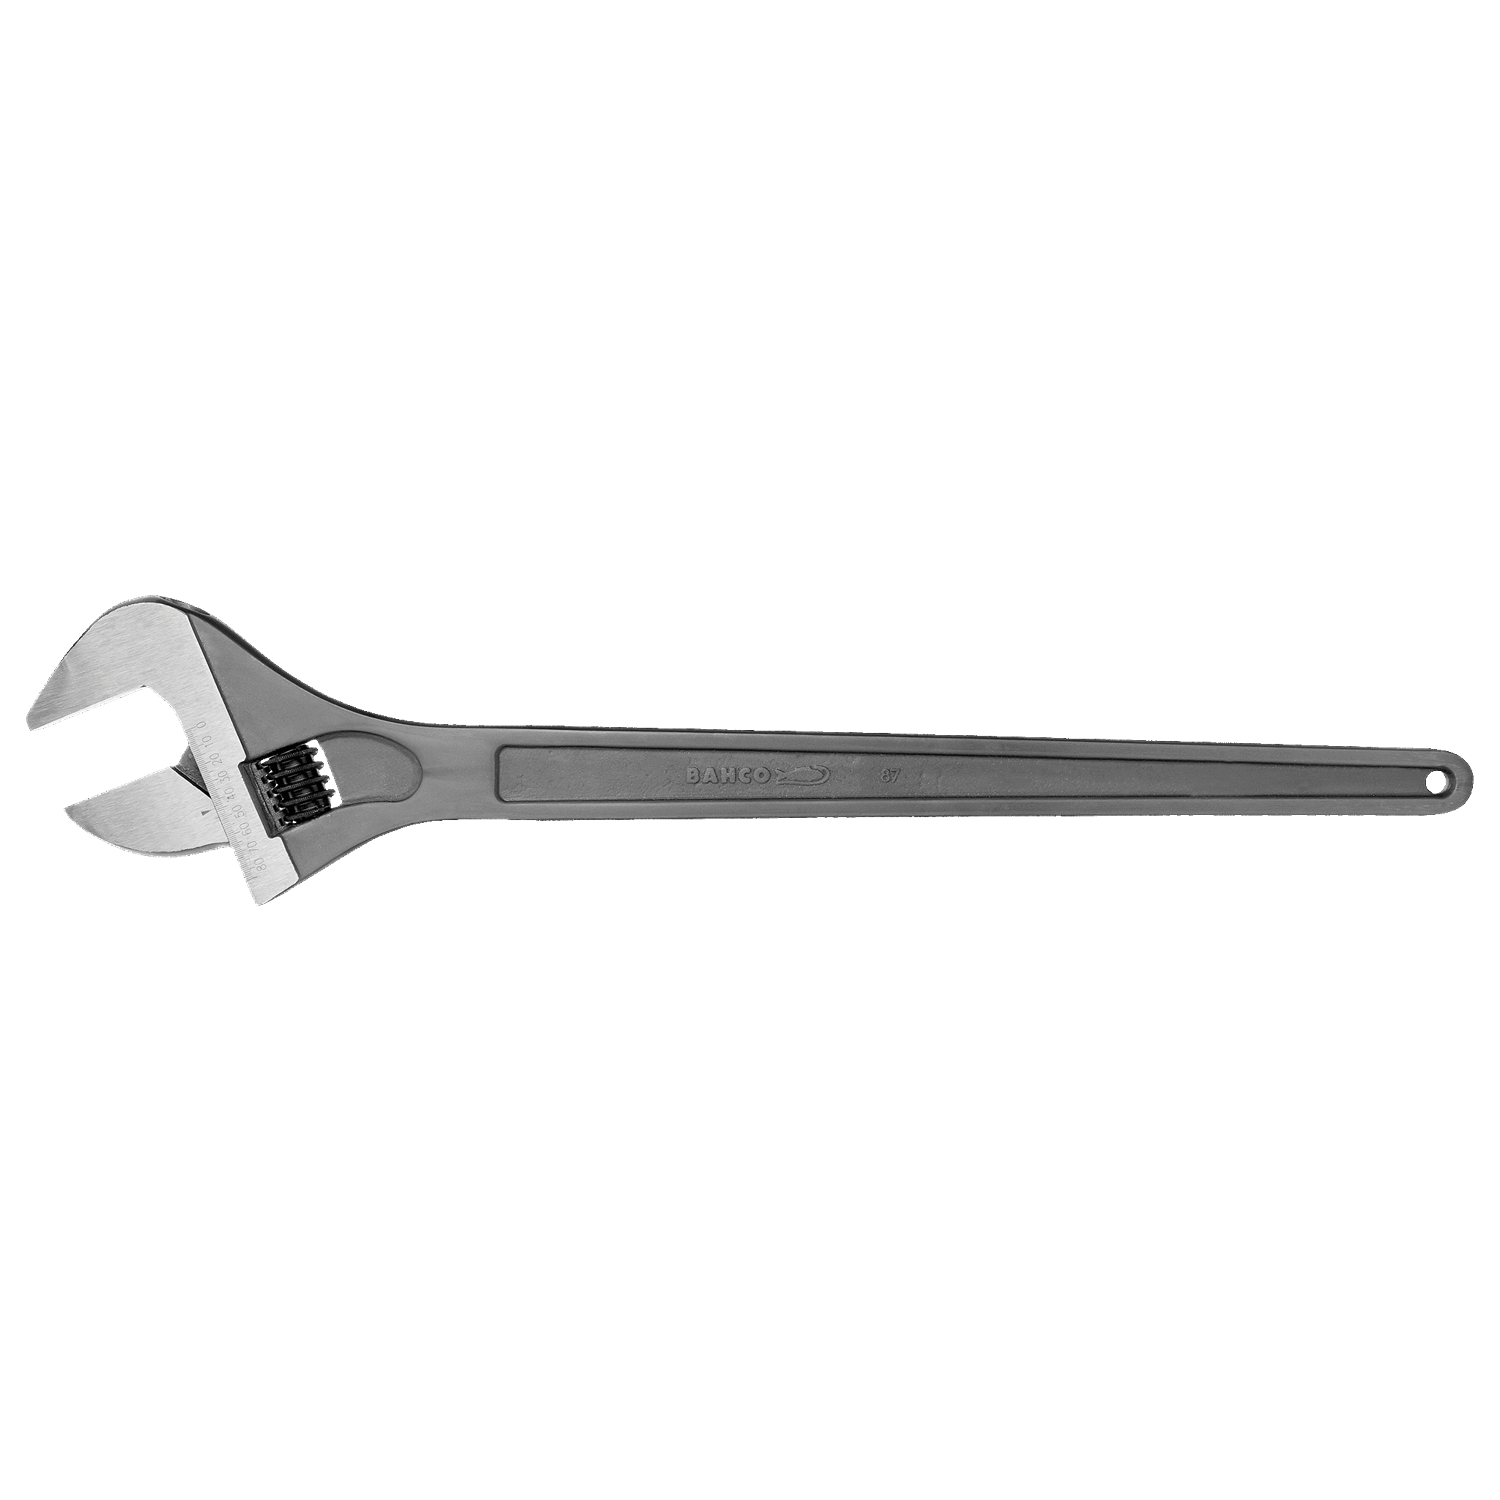 BAHCO 86 Standard Central Nut Adjustable Wrench Phosphate 614mm - Premium Adjustable Wrench from BAHCO - Shop now at Yew Aik.